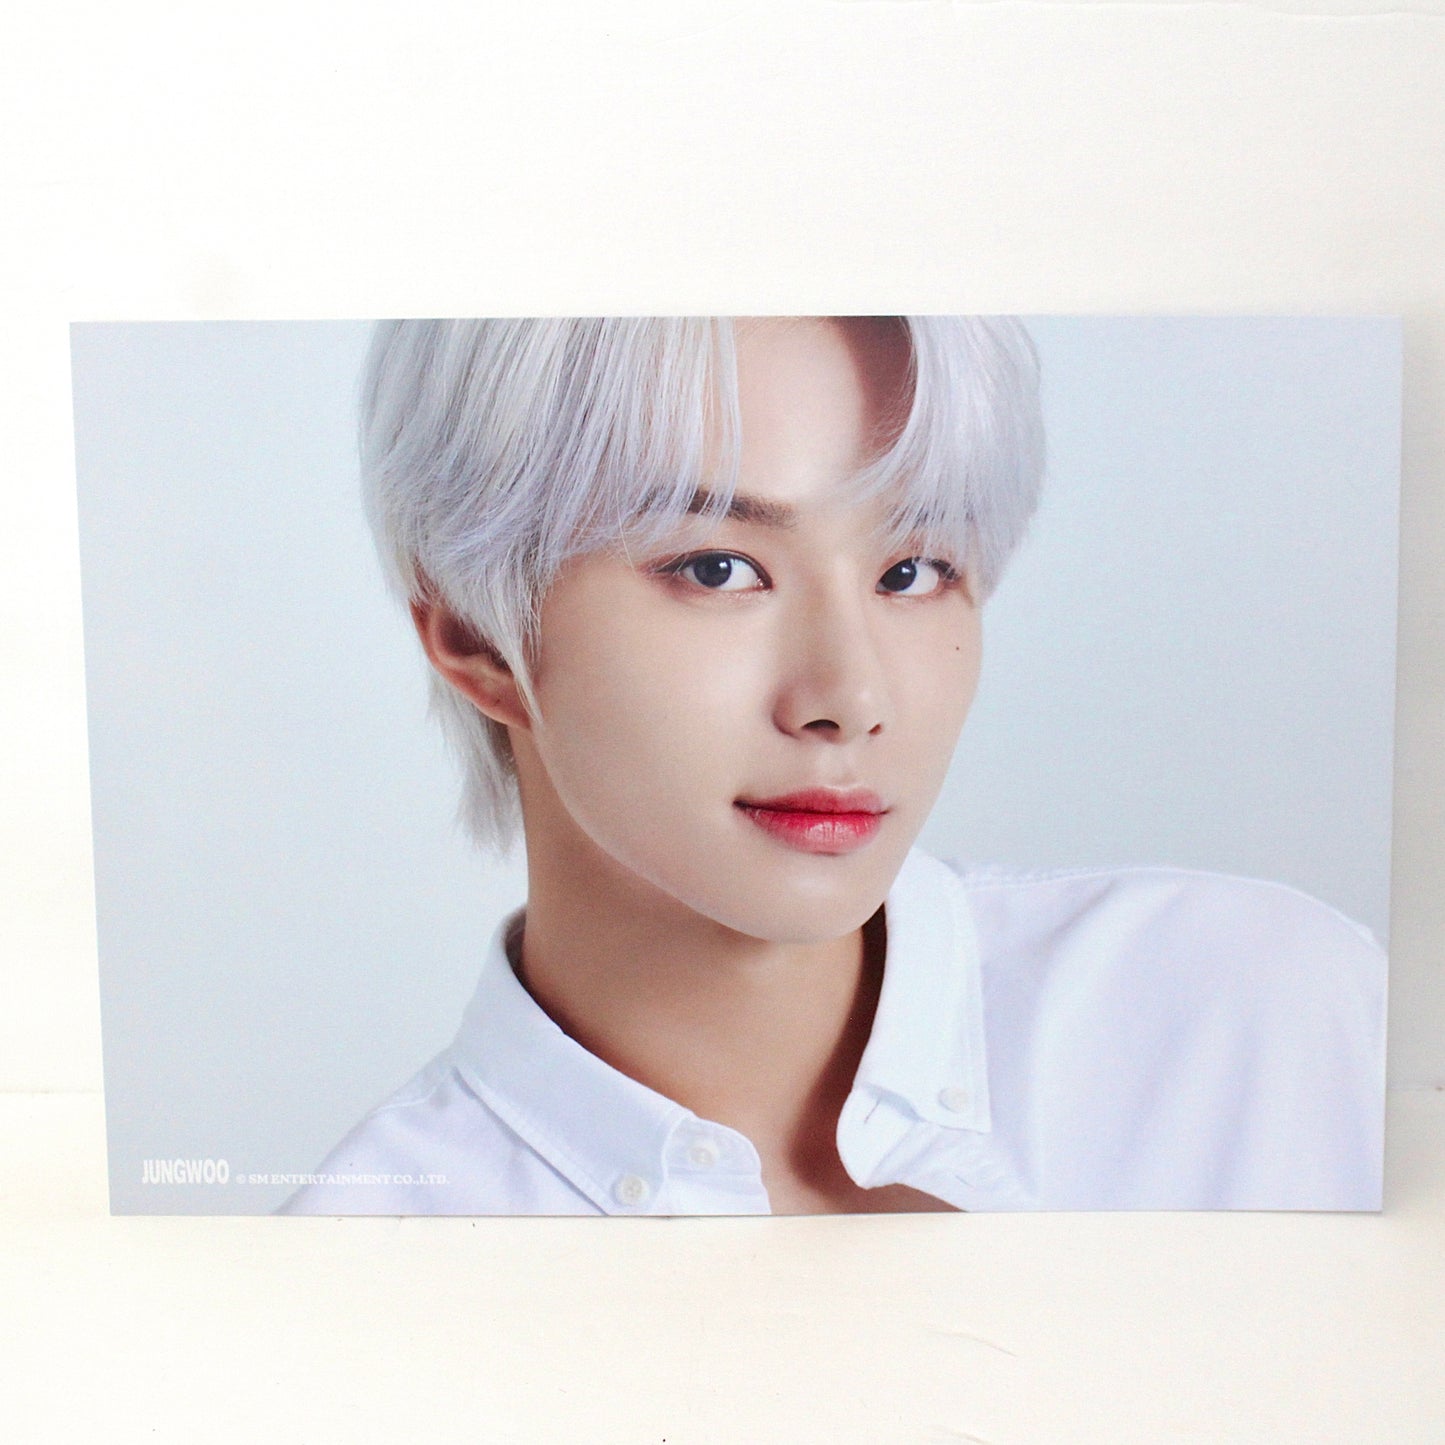 NCT 127 2022 Season's Greetings: 127 Pizza | Inclusions